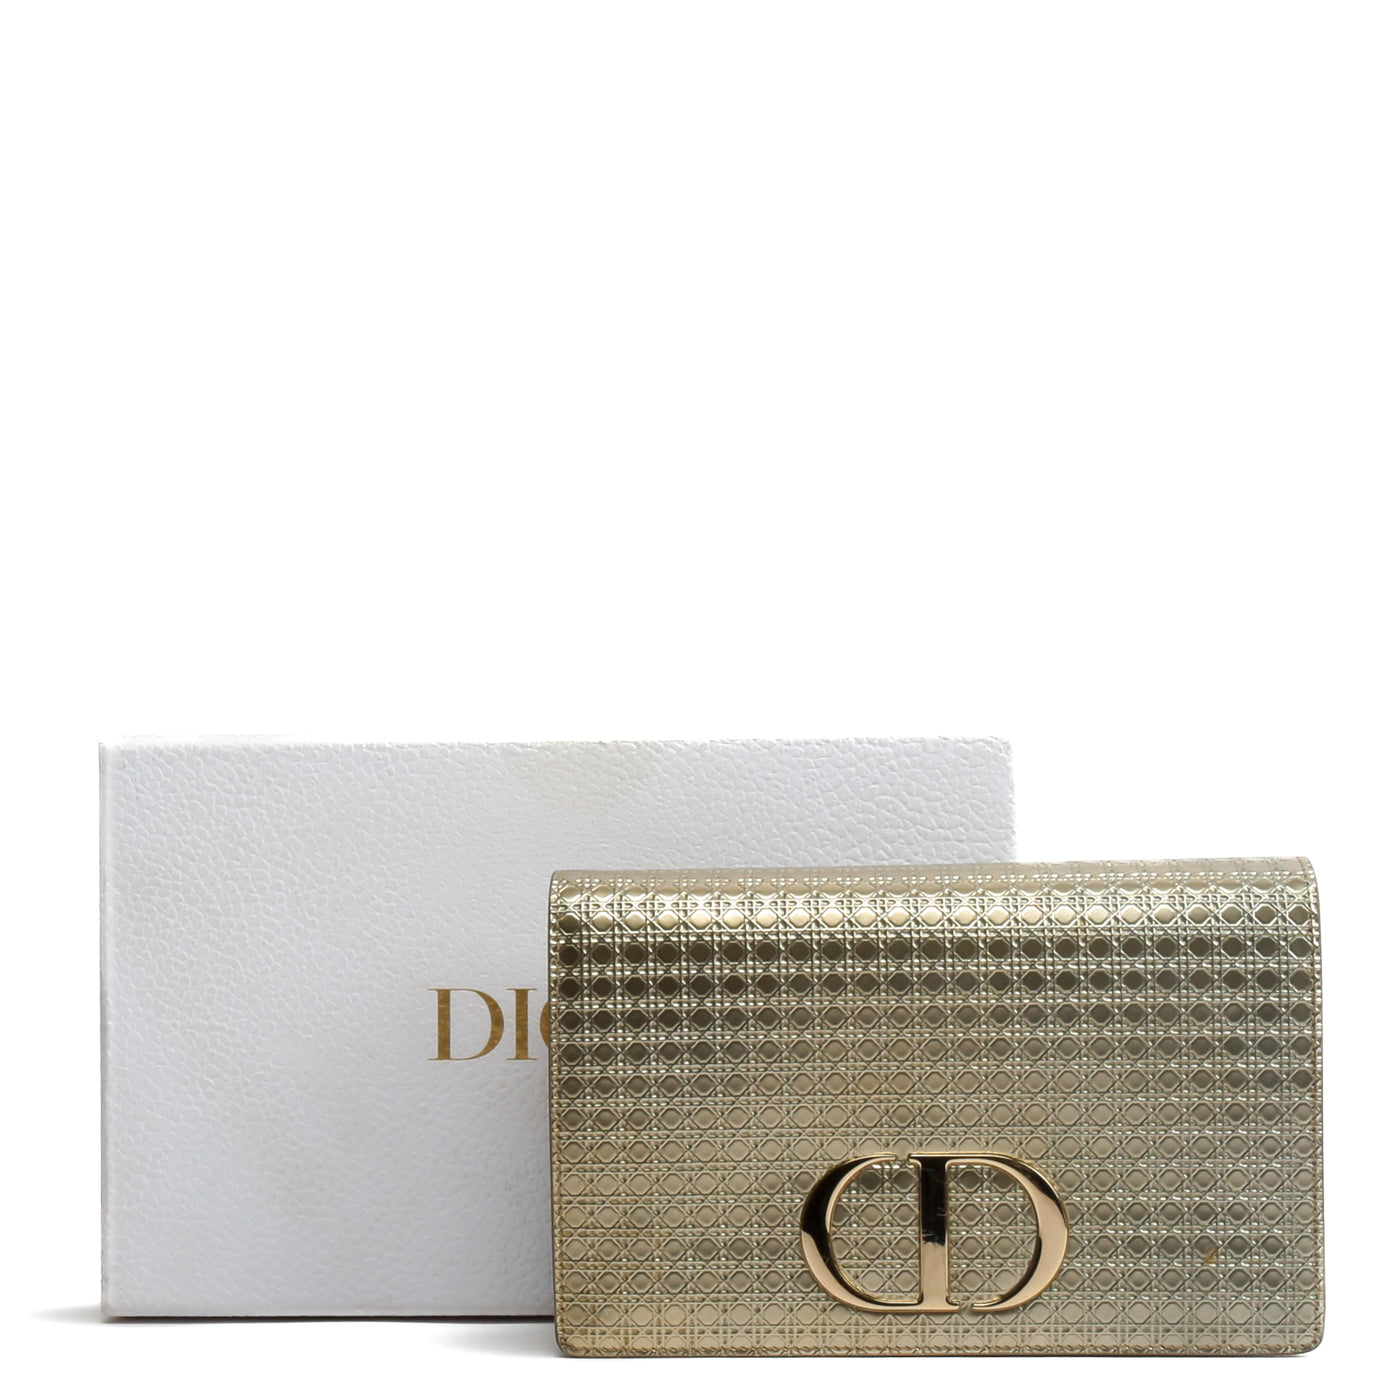 CHRISTIAN DIOR 30 Micro Cannage Montaigne 2 in 1 Pouch - Metallic Gold